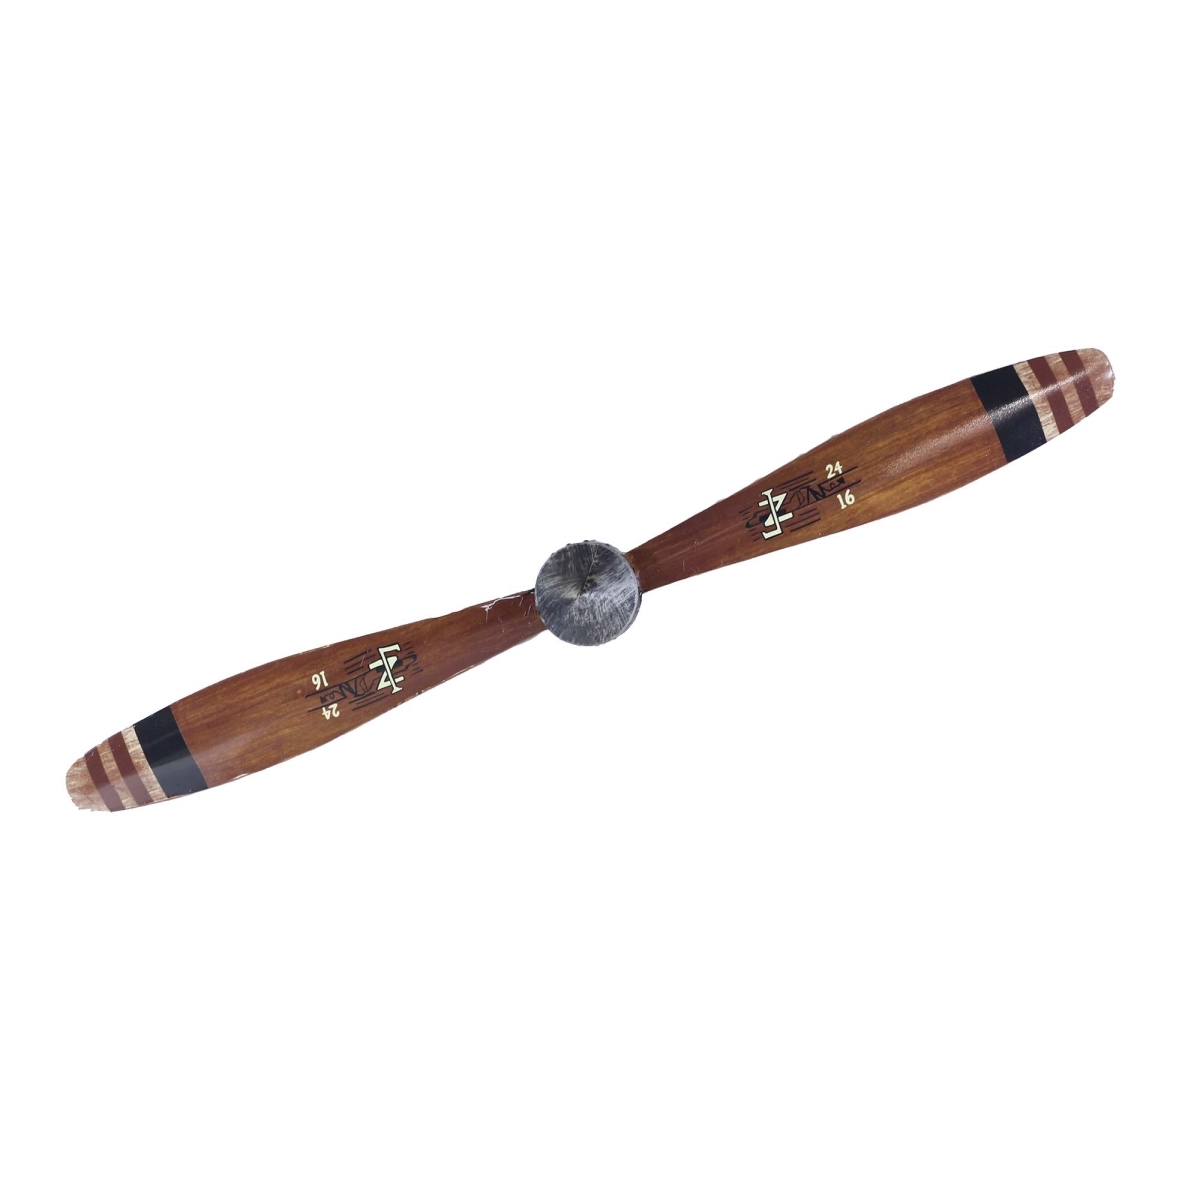 Bm-jq17402l Metal Painted Airplane Propeller Wall Decor - Large